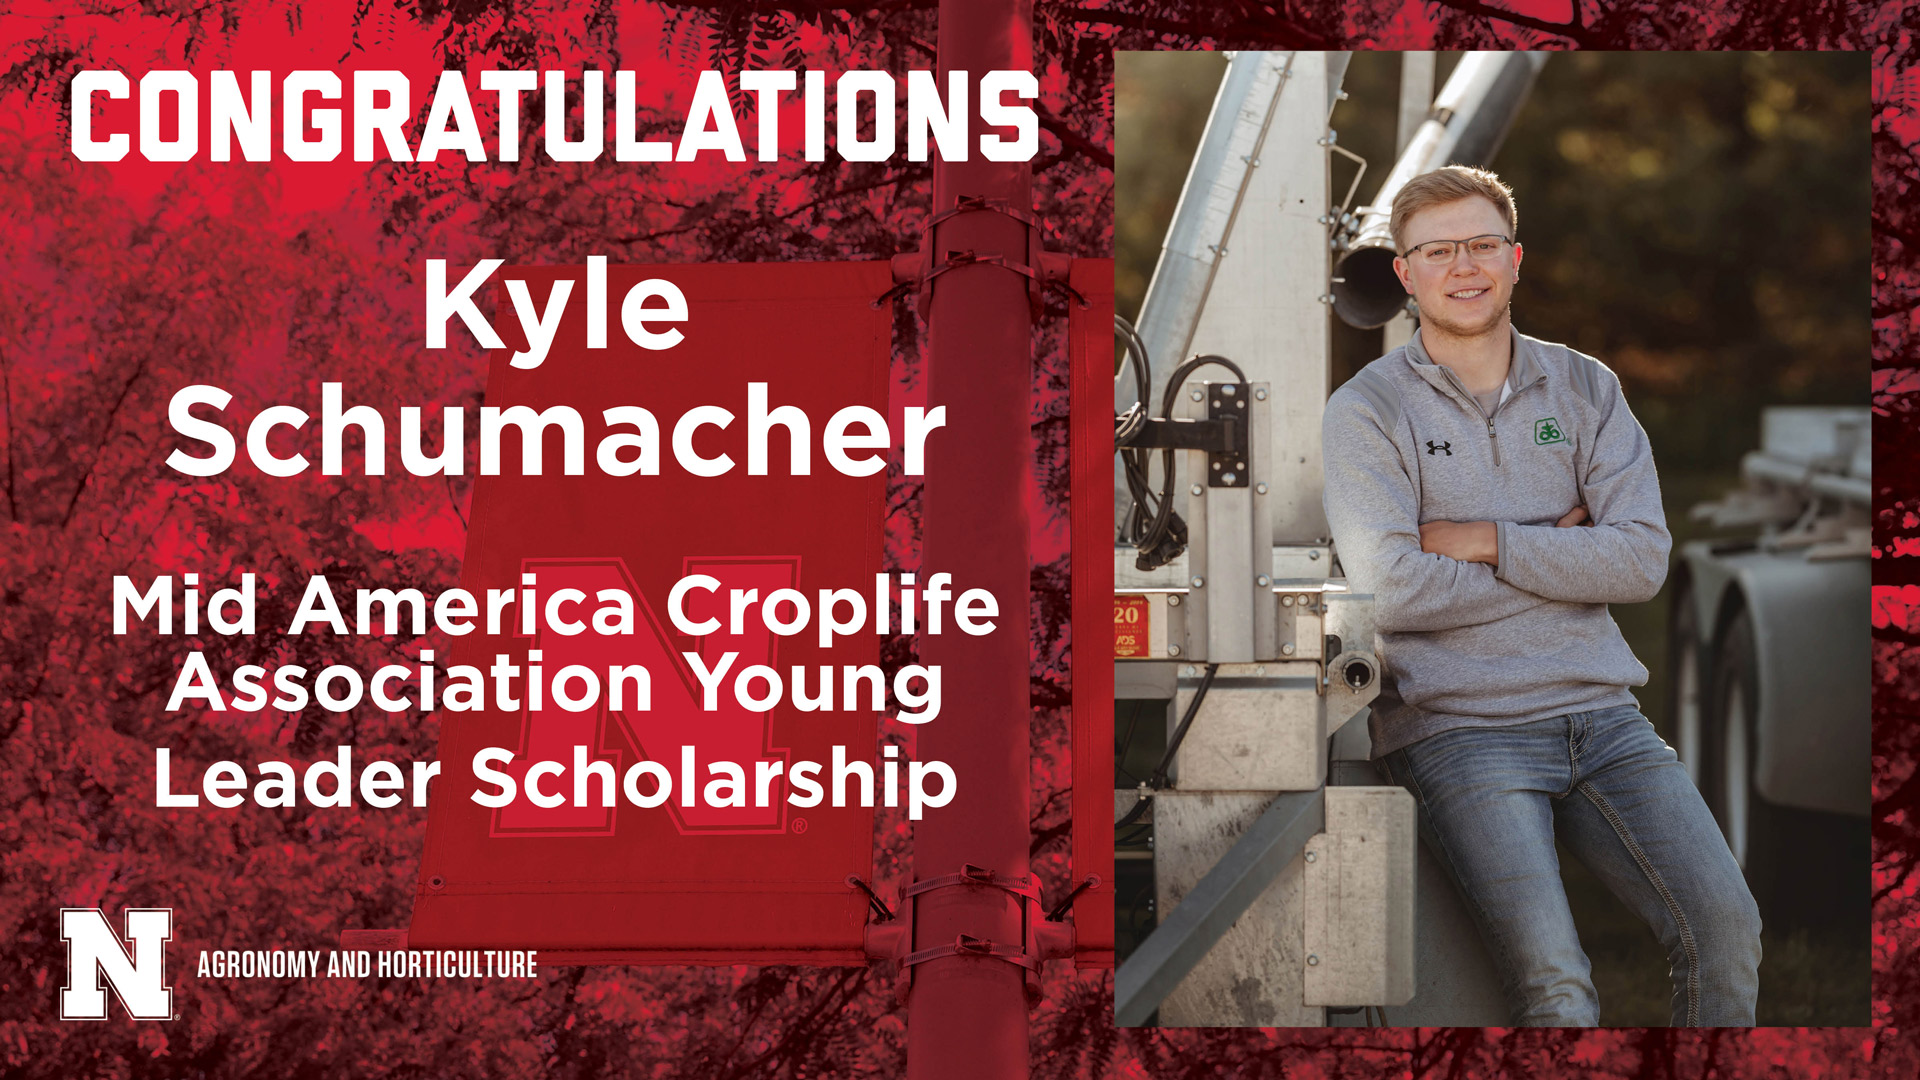 Kyle Schumacher, a sophomore agronomy major, was named a recipient of the 2021 Mid America Croplife Association Young Leader Scholarship.